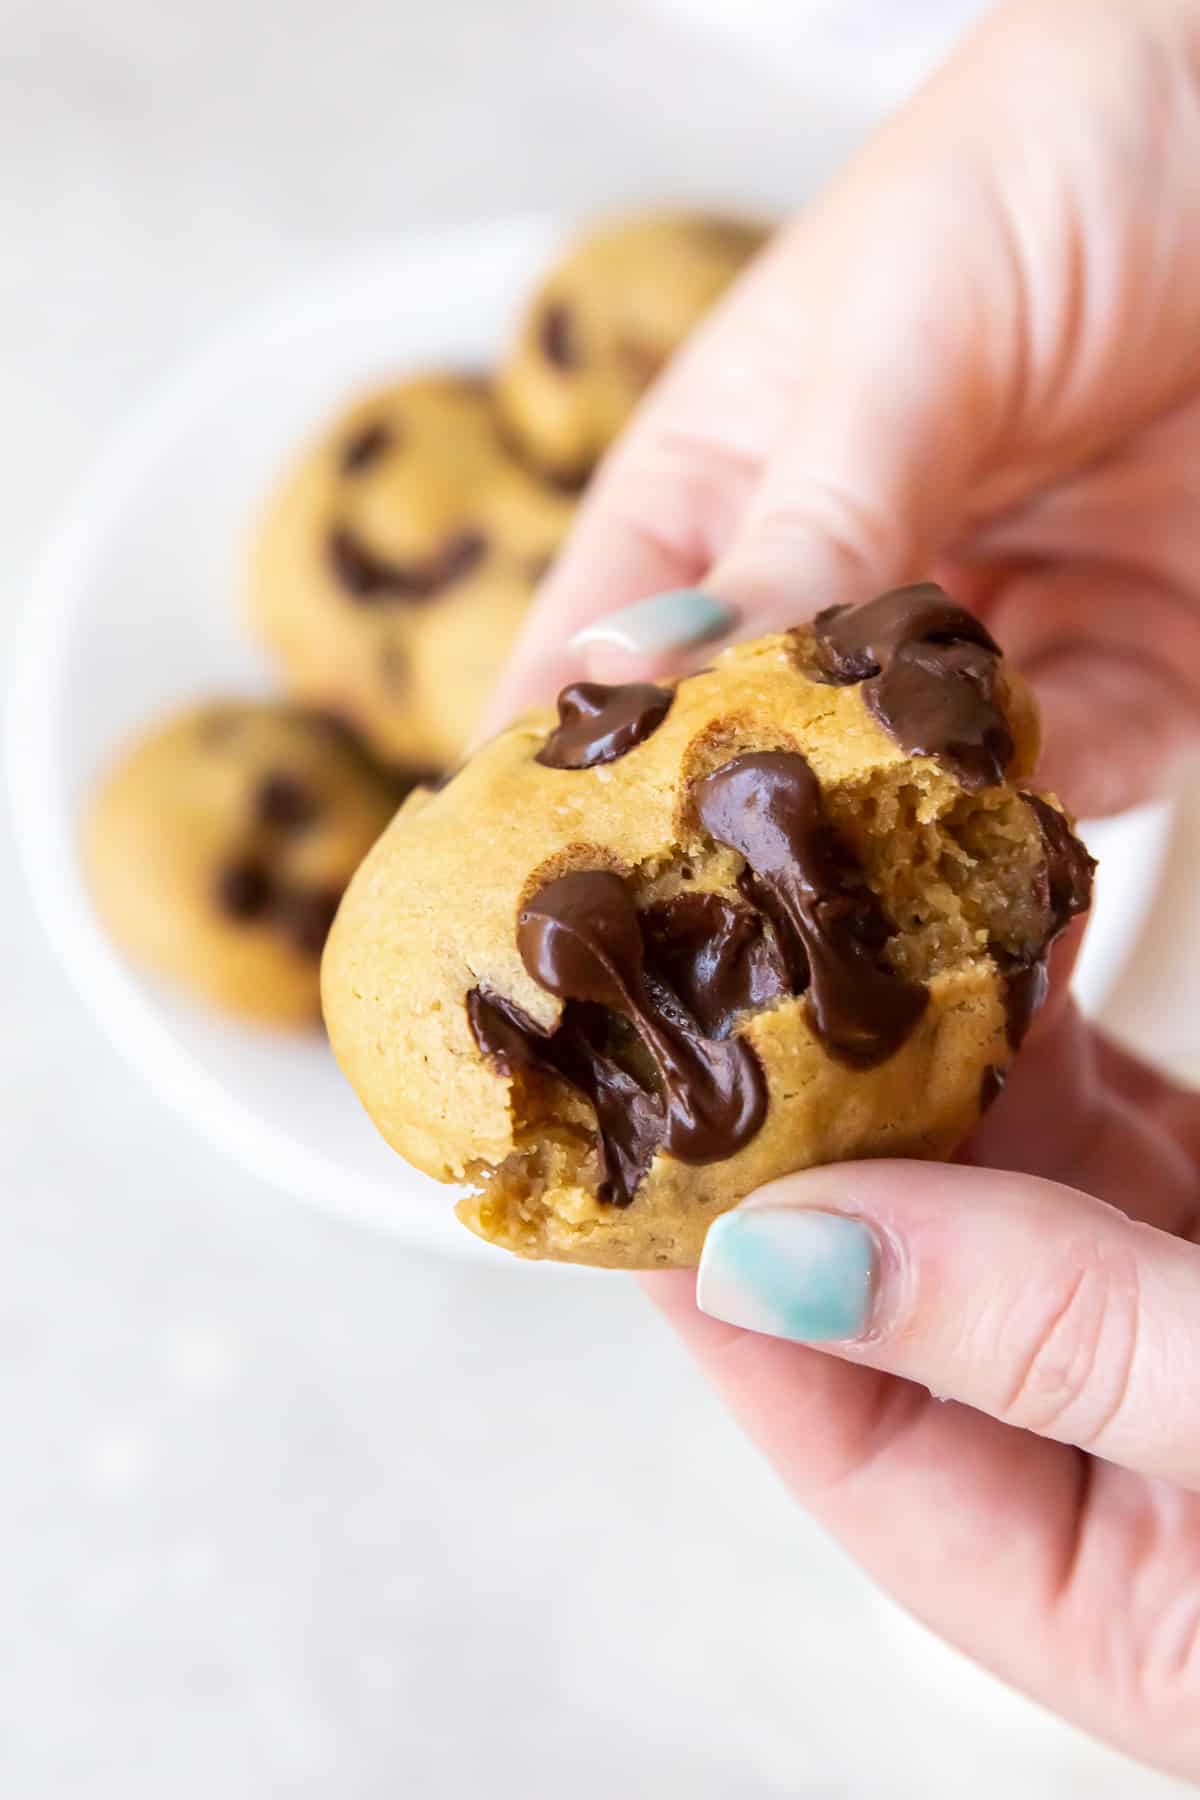 Hands breaking a chocolate chip cookie in half to reveal melted chocolate chips.